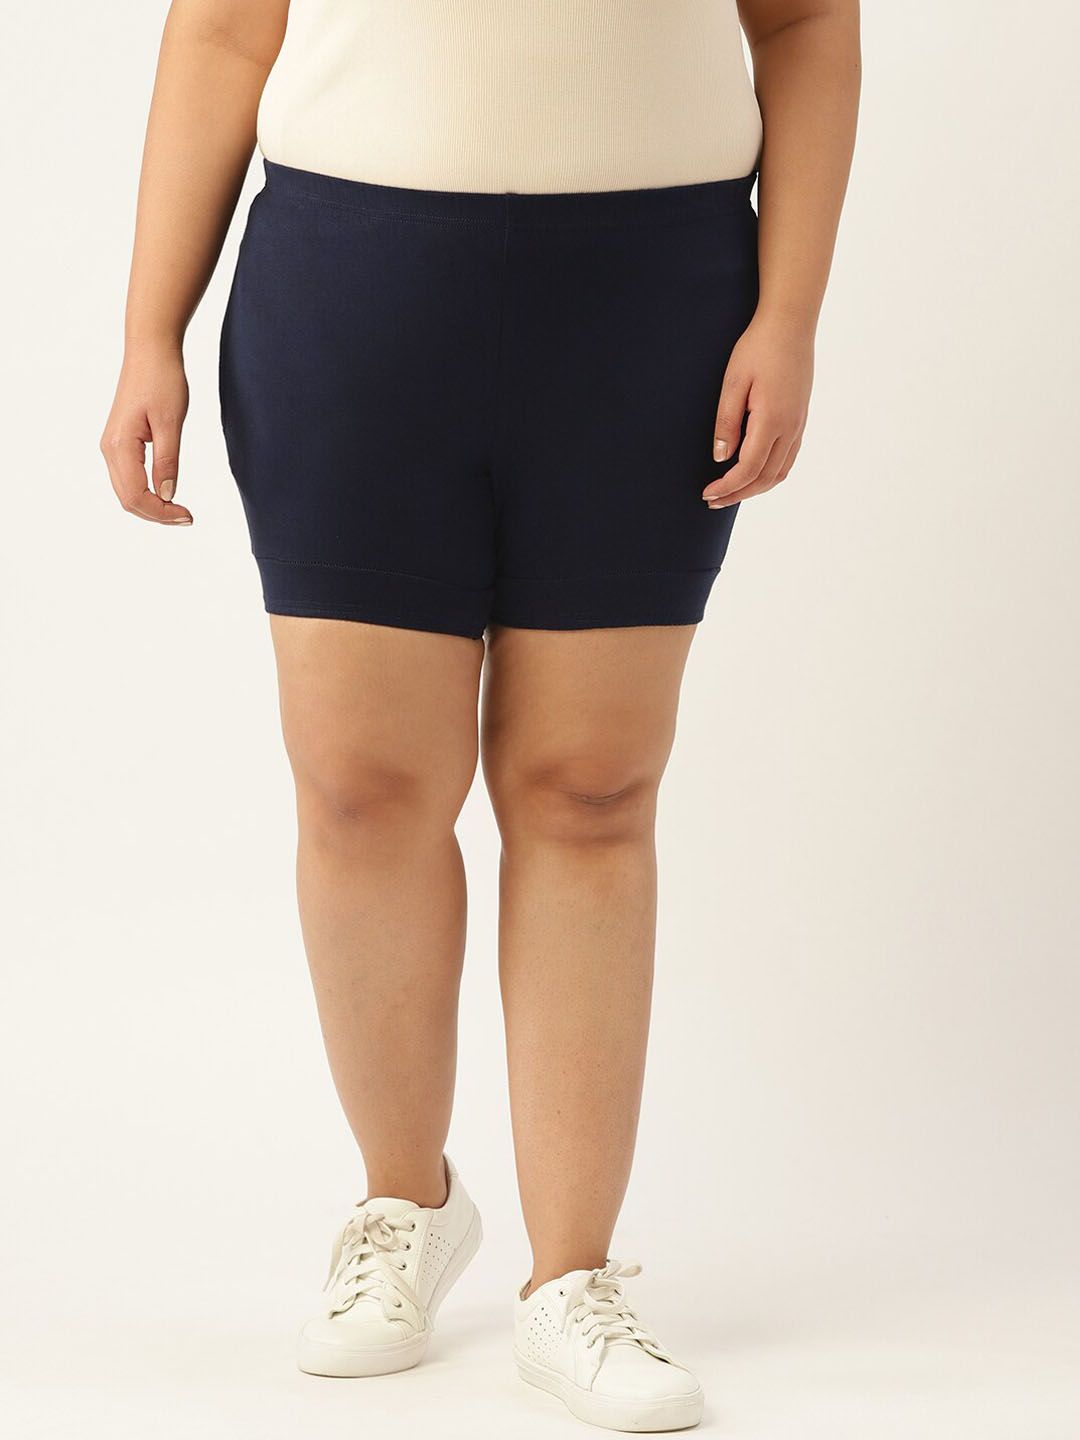 theRebelinme Women Navy Blue High-Rise Yoga Sports Shorts Price in India